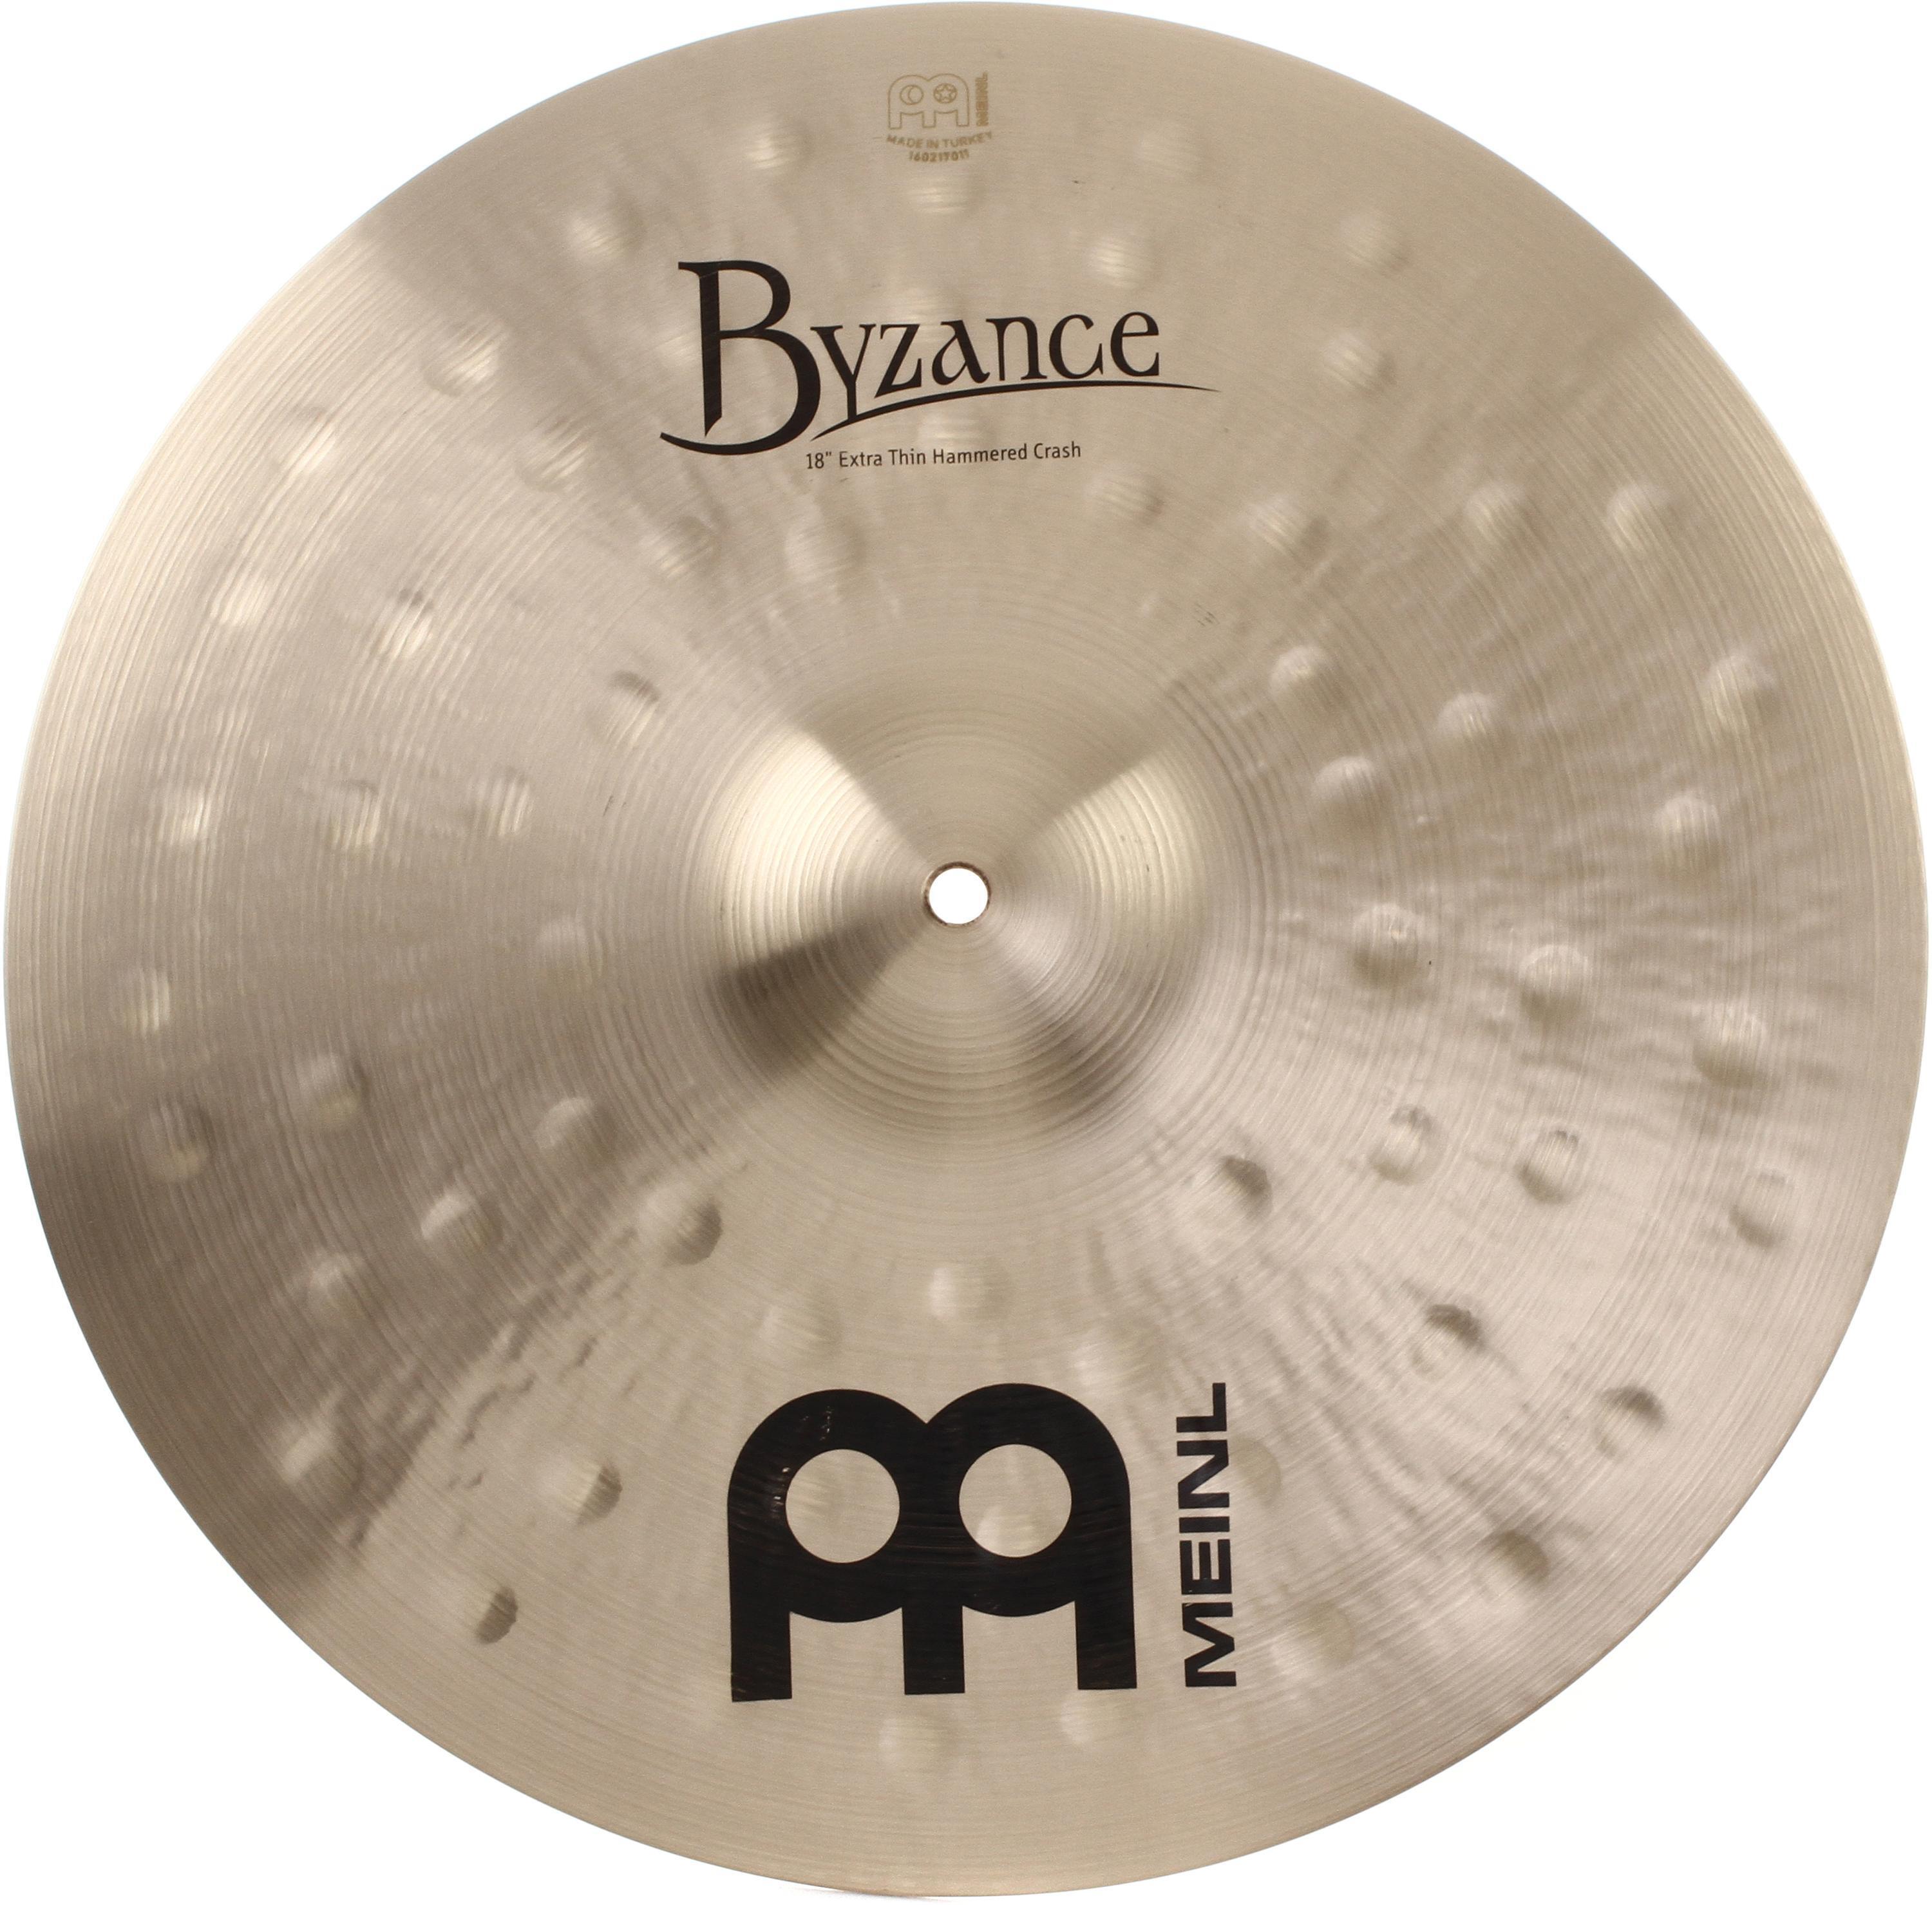 Bundled Item: Meinl Cymbals 18 inch Byzance Traditional Extra Thin Hammered Crash Cymbal